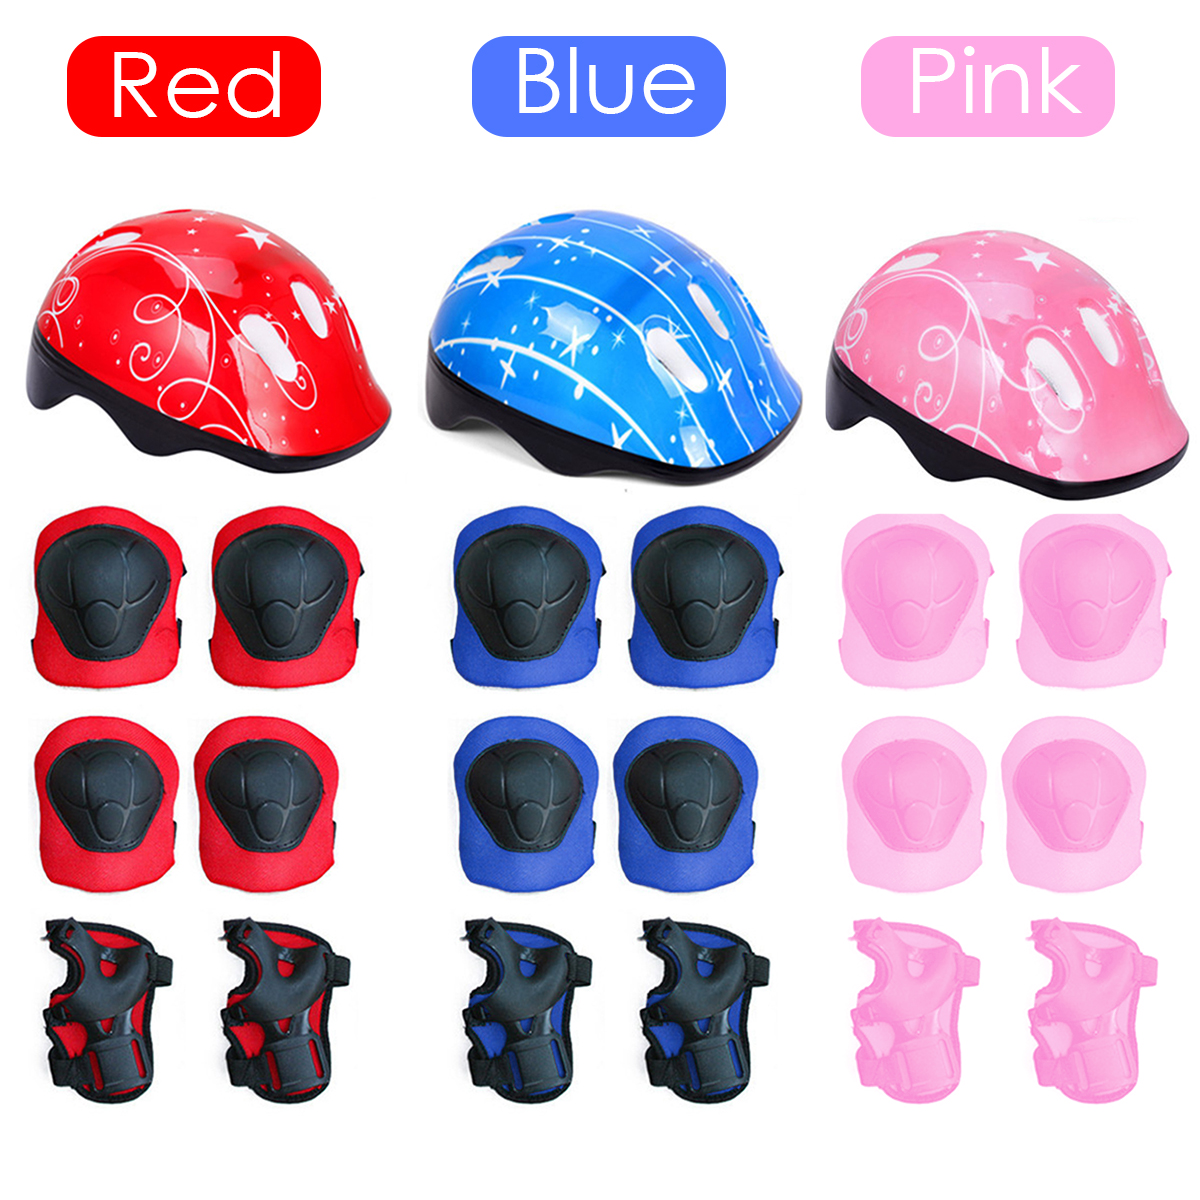 7-IN-1-Kidss-Balance-Bike-Helmet-Kits-With-Protect-Knee-Wrist-Elbow-Pads-Roller-Skating-Protective-E-1734300-7